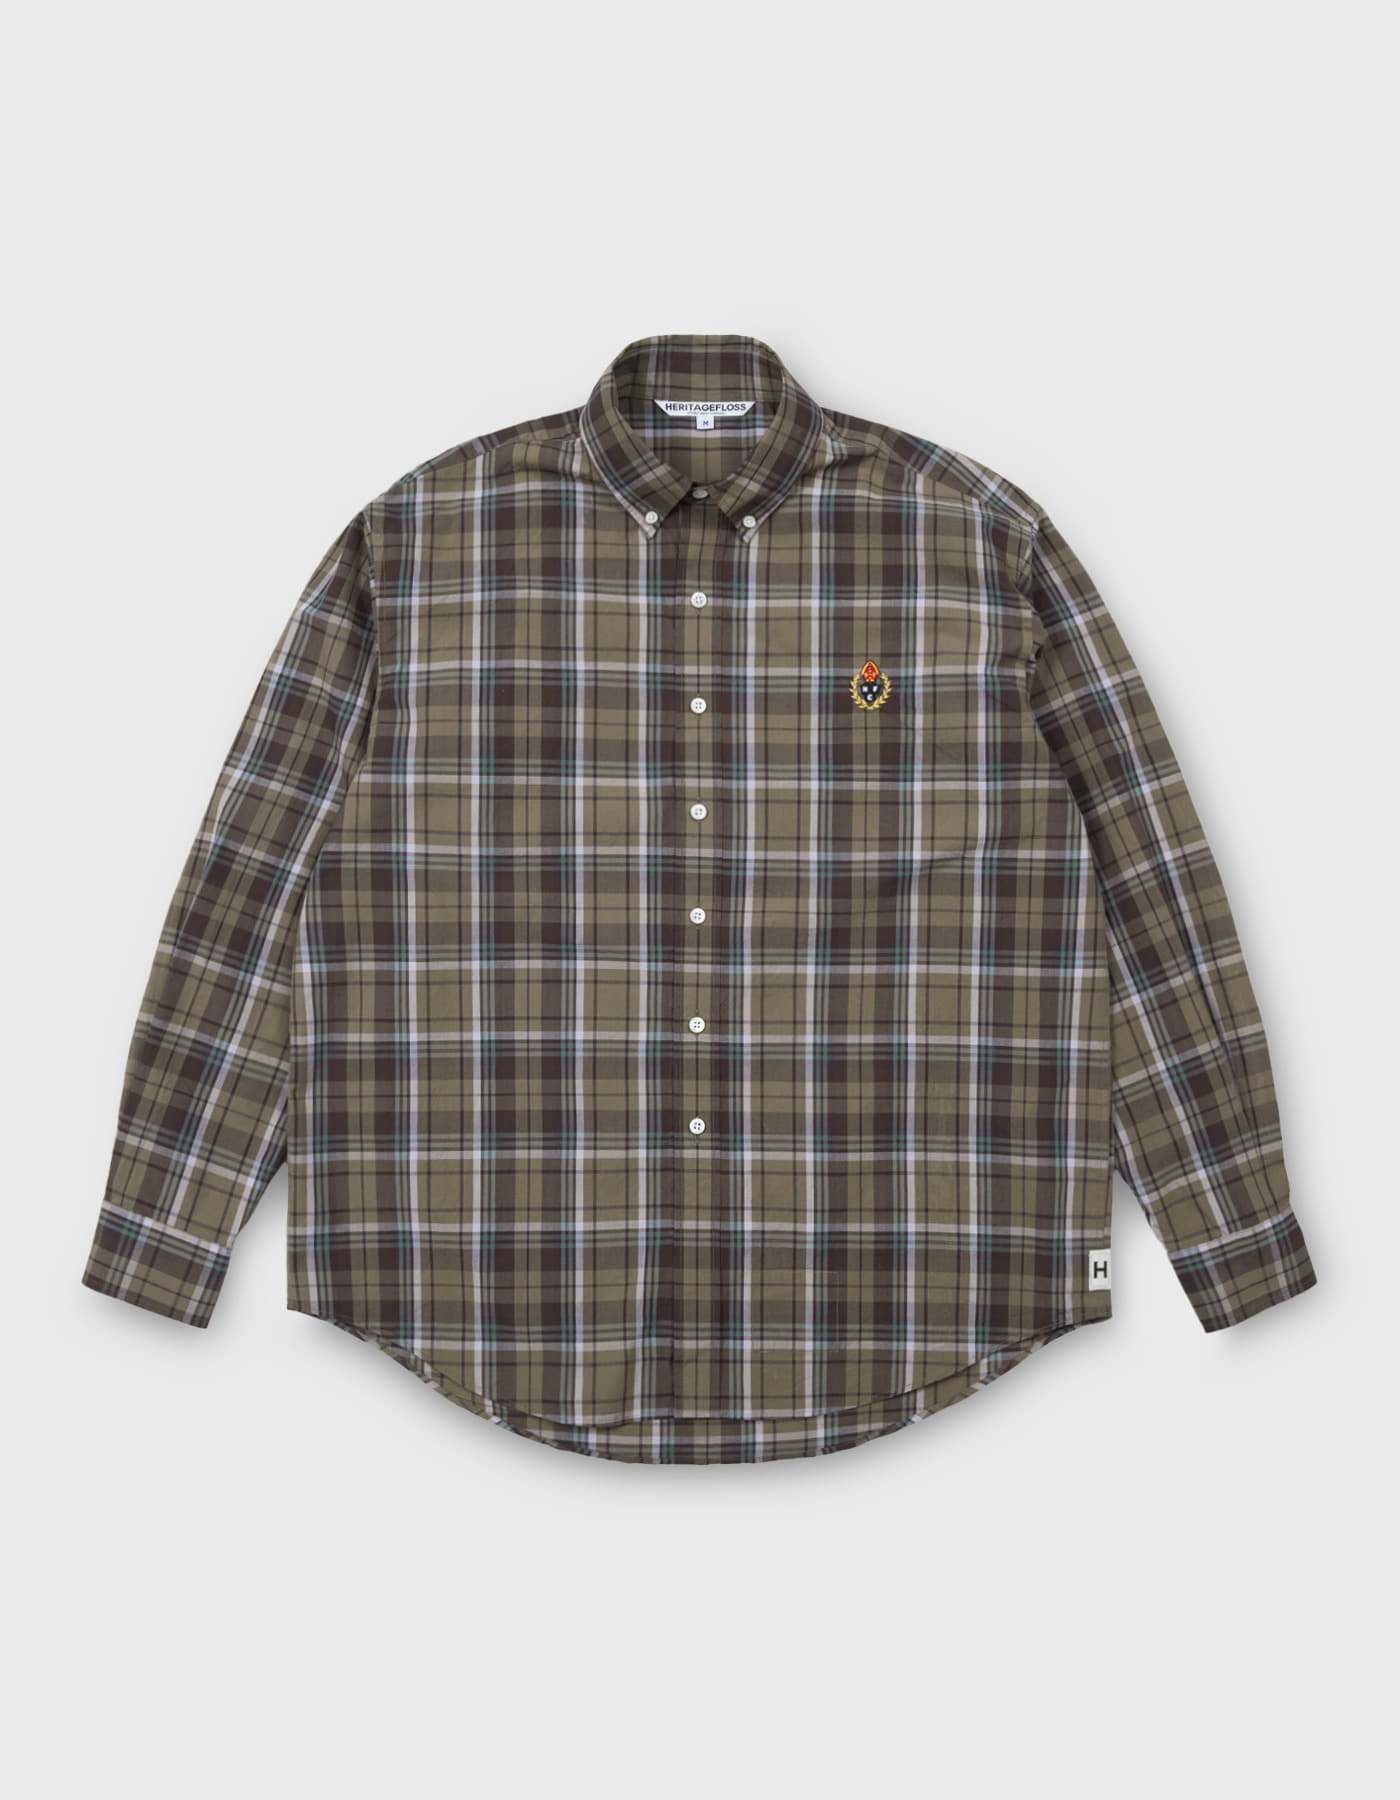 HFC CREST CHECKED SHIRT / Green-Brown